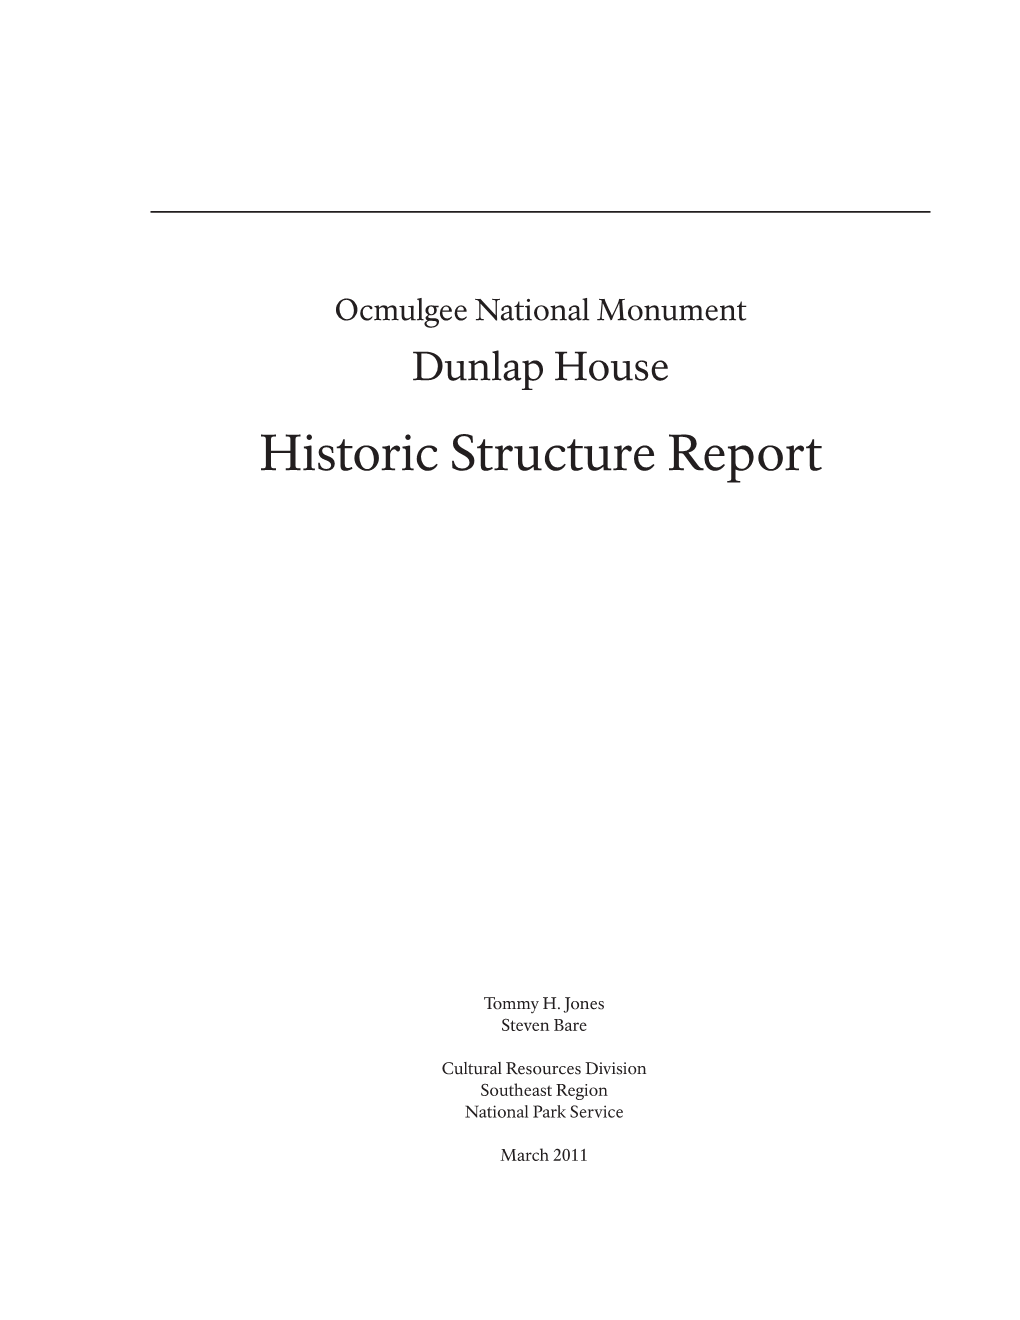 Historic Structure Report